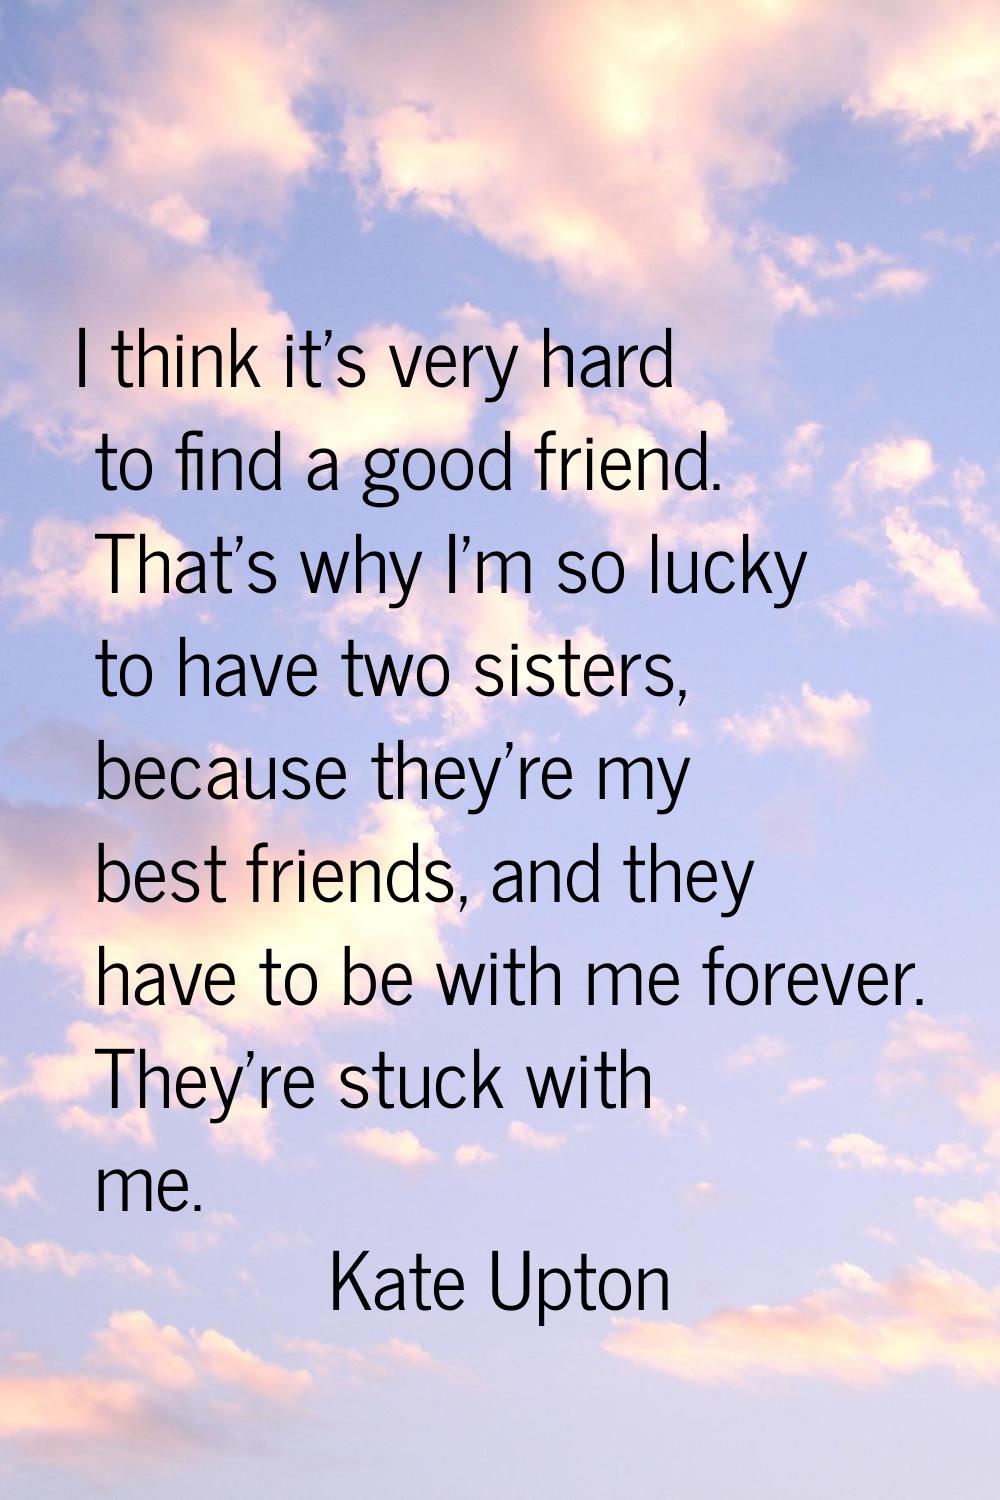 I think it's very hard to find a good friend. That's why I'm so lucky to have two sisters, because 